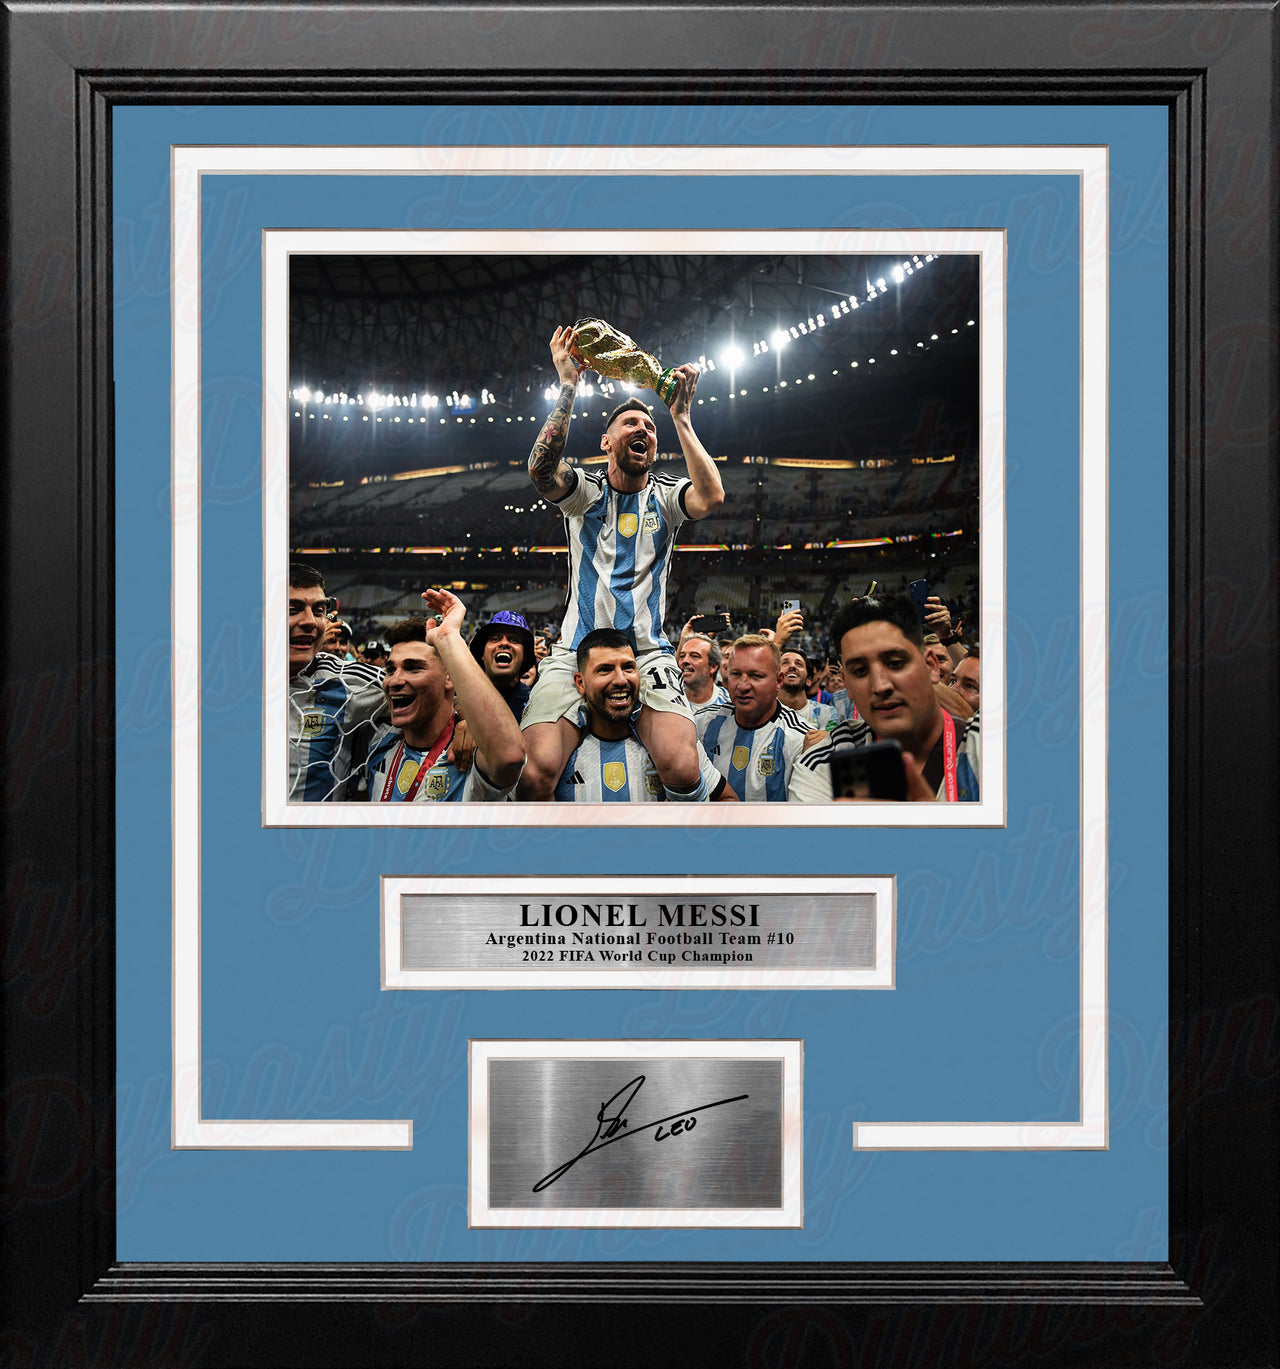 Lionel Messi 2022 World Cup Argentina National Team 8x10 Framed Photo with Engraved Autograph - Dynasty Sports & Framing 